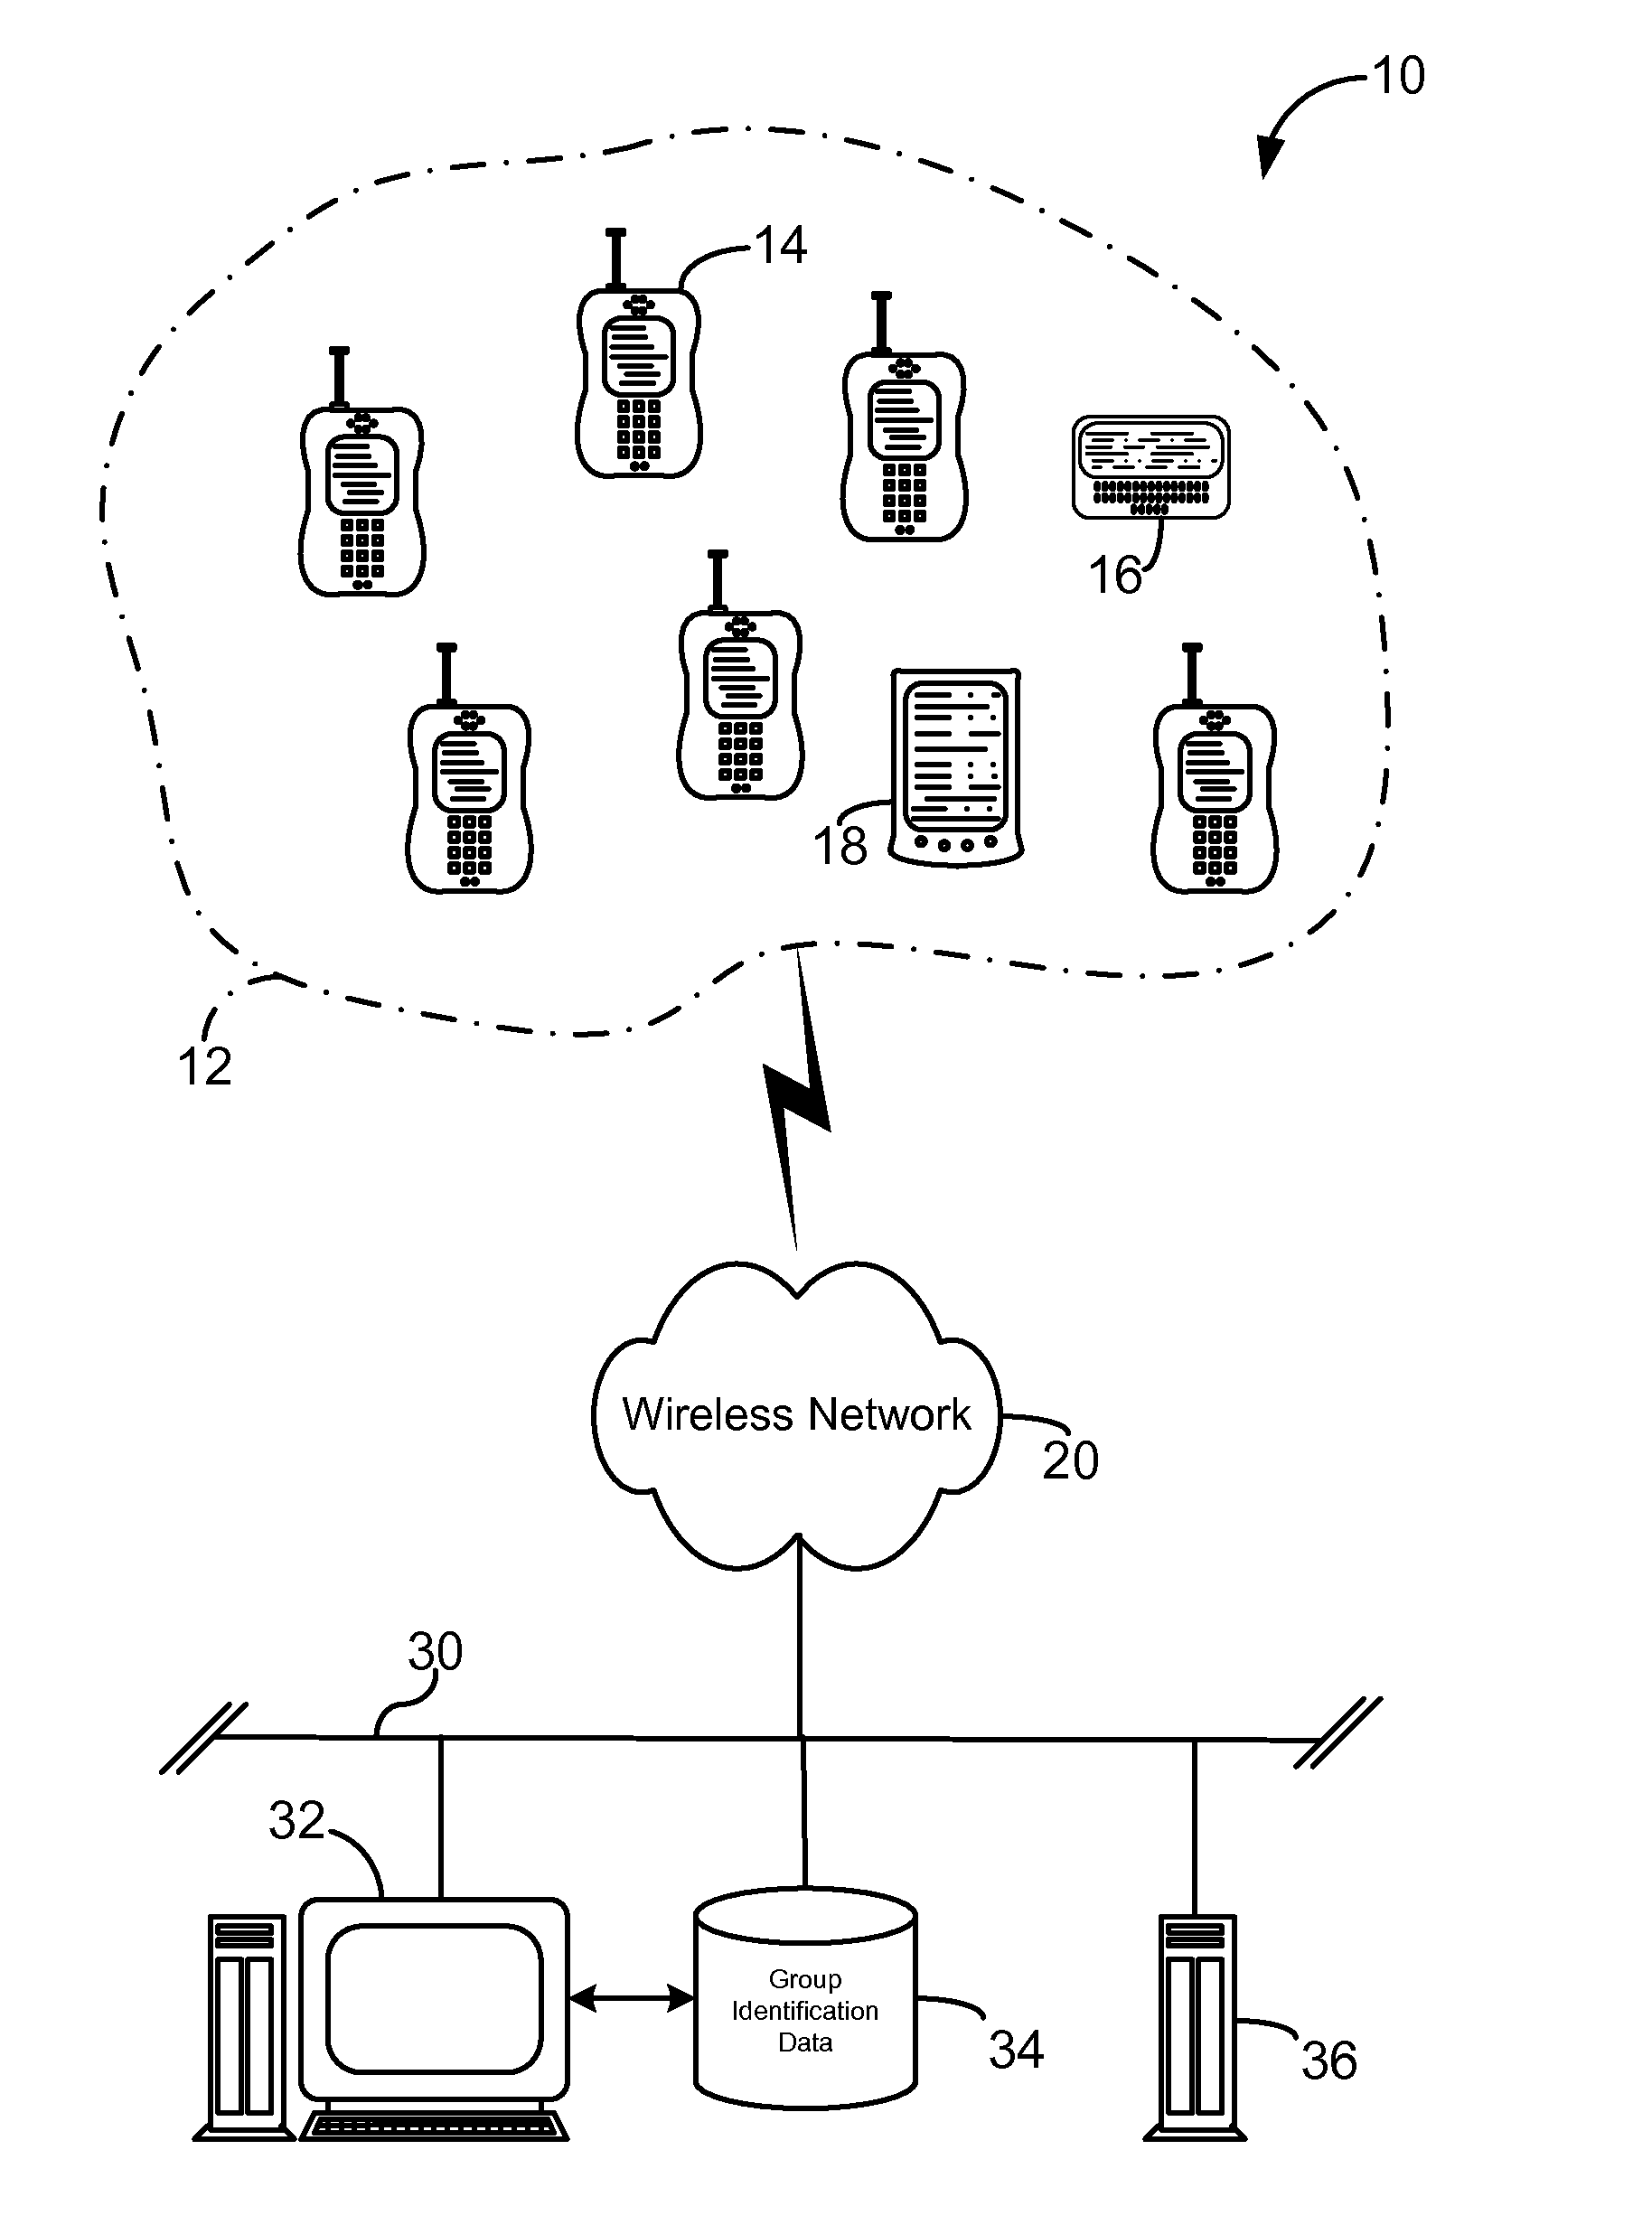 Reducing latency in a prepaid group communication session within a wireless communications system